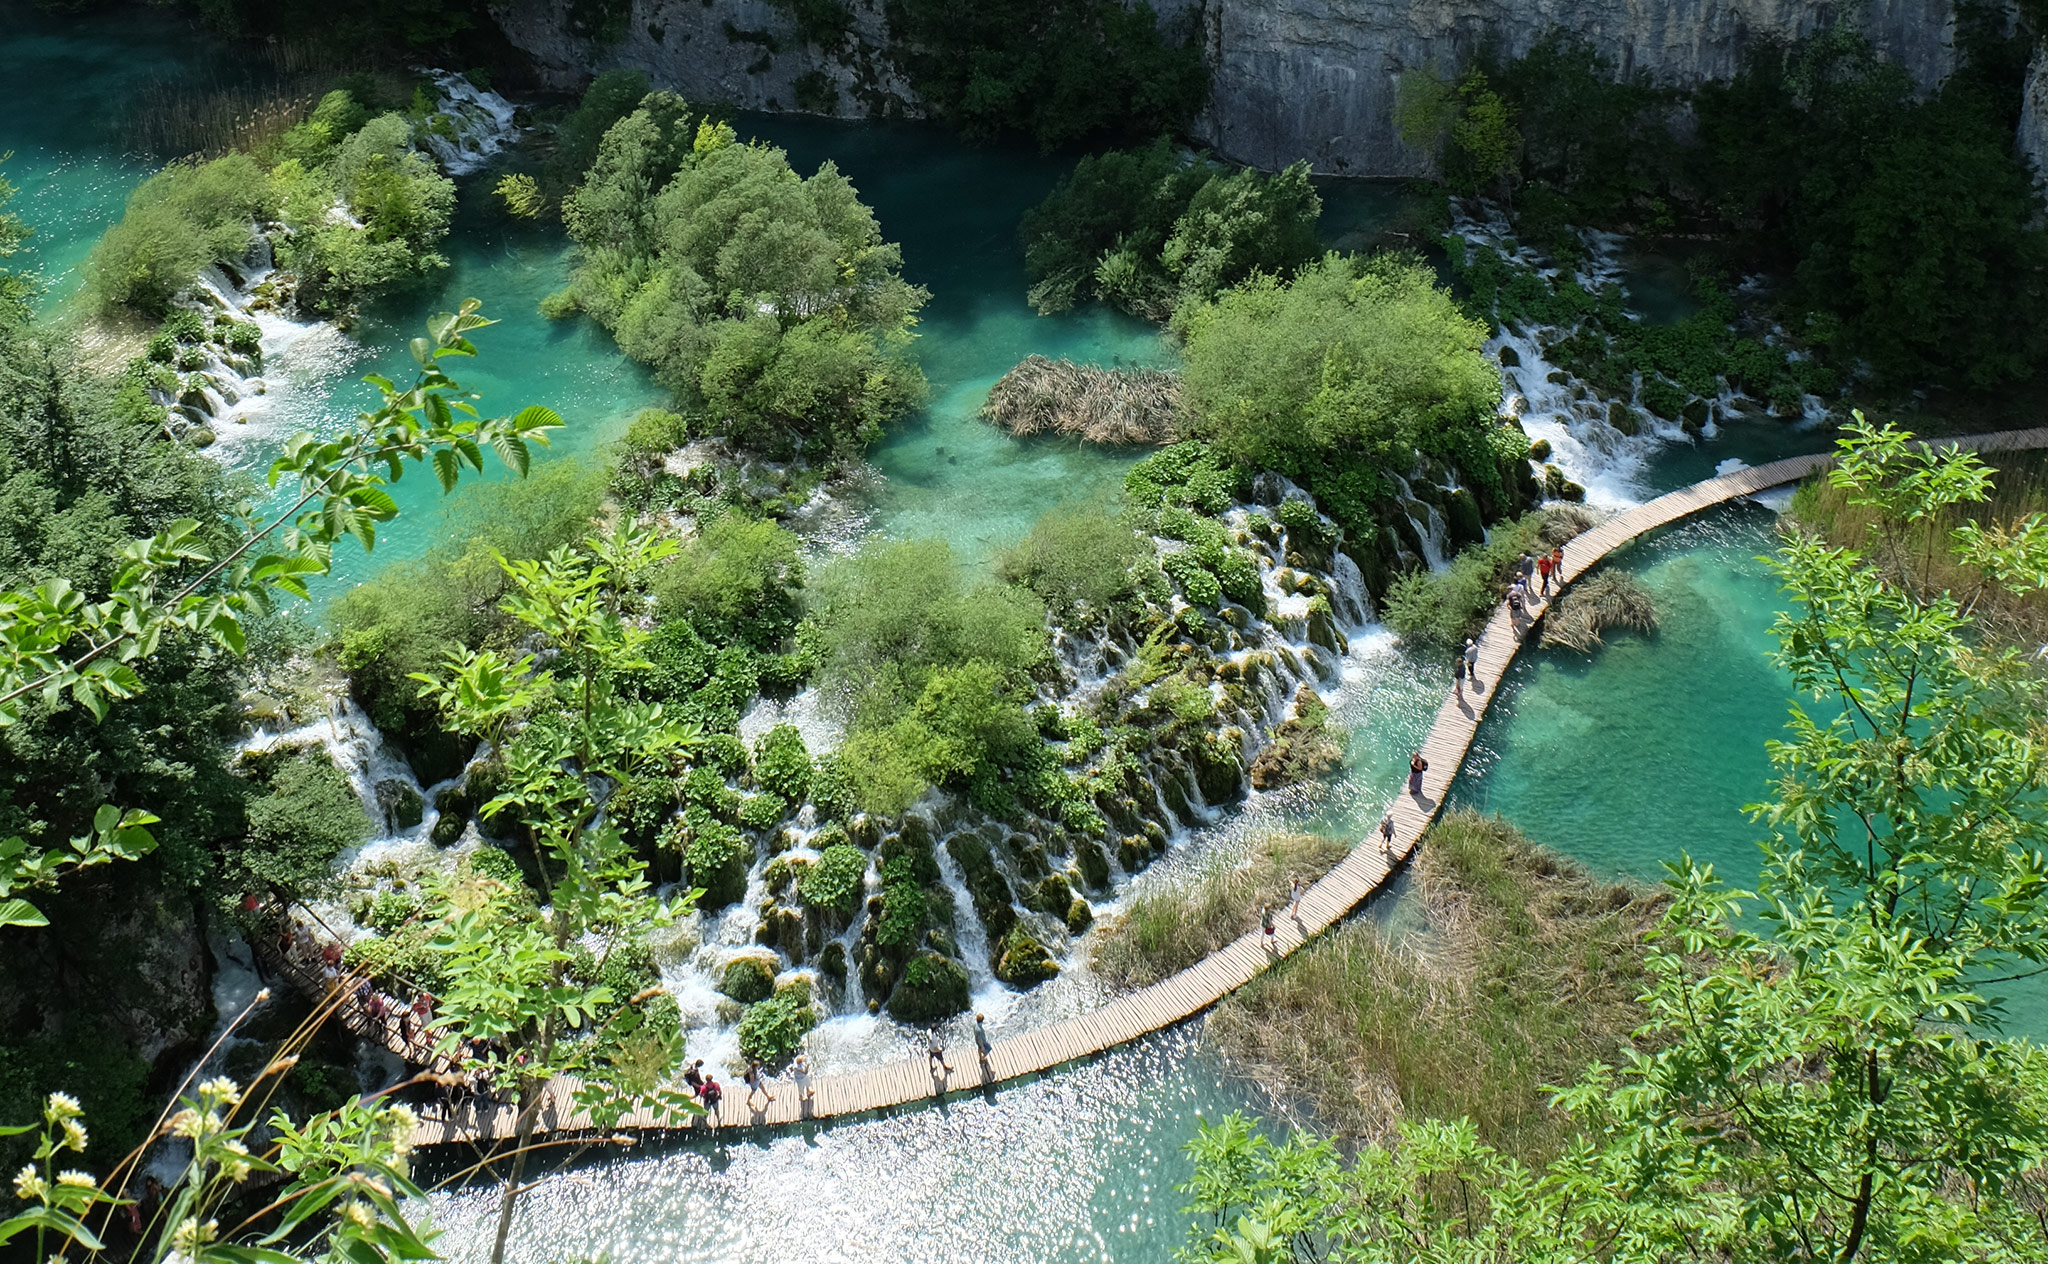 Visiting the Plitvice Lakes National Park - Helen on her Holidays